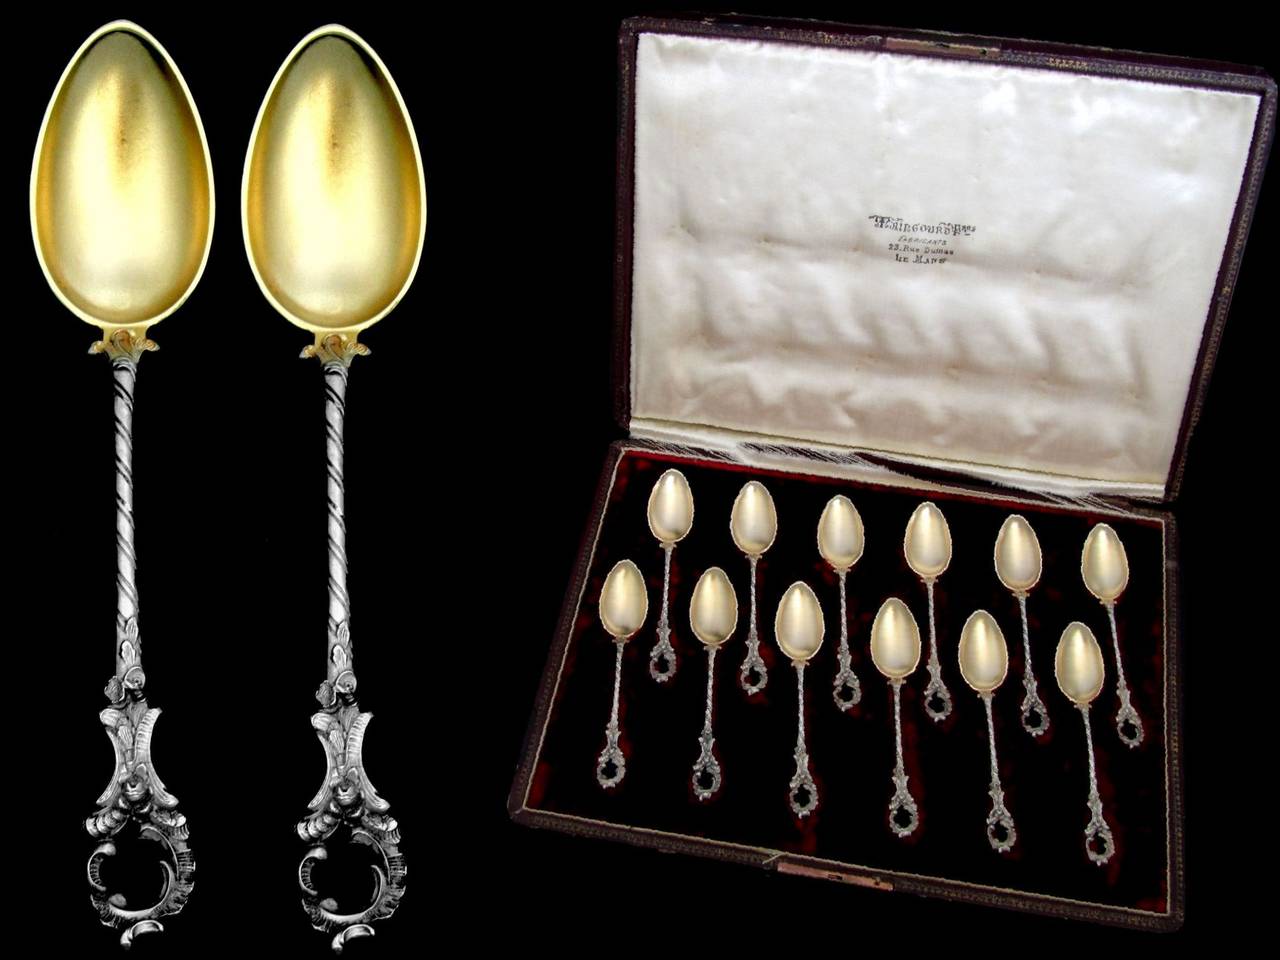 Antique Sterling Silver Gold Teaspoons Set 12 pc w/orignal box Rococo

Weevil French mark in use July 1, 1864 to June 30, 1893. Imported from Germany for at least 800/1000 sterling silver.

German marks : 